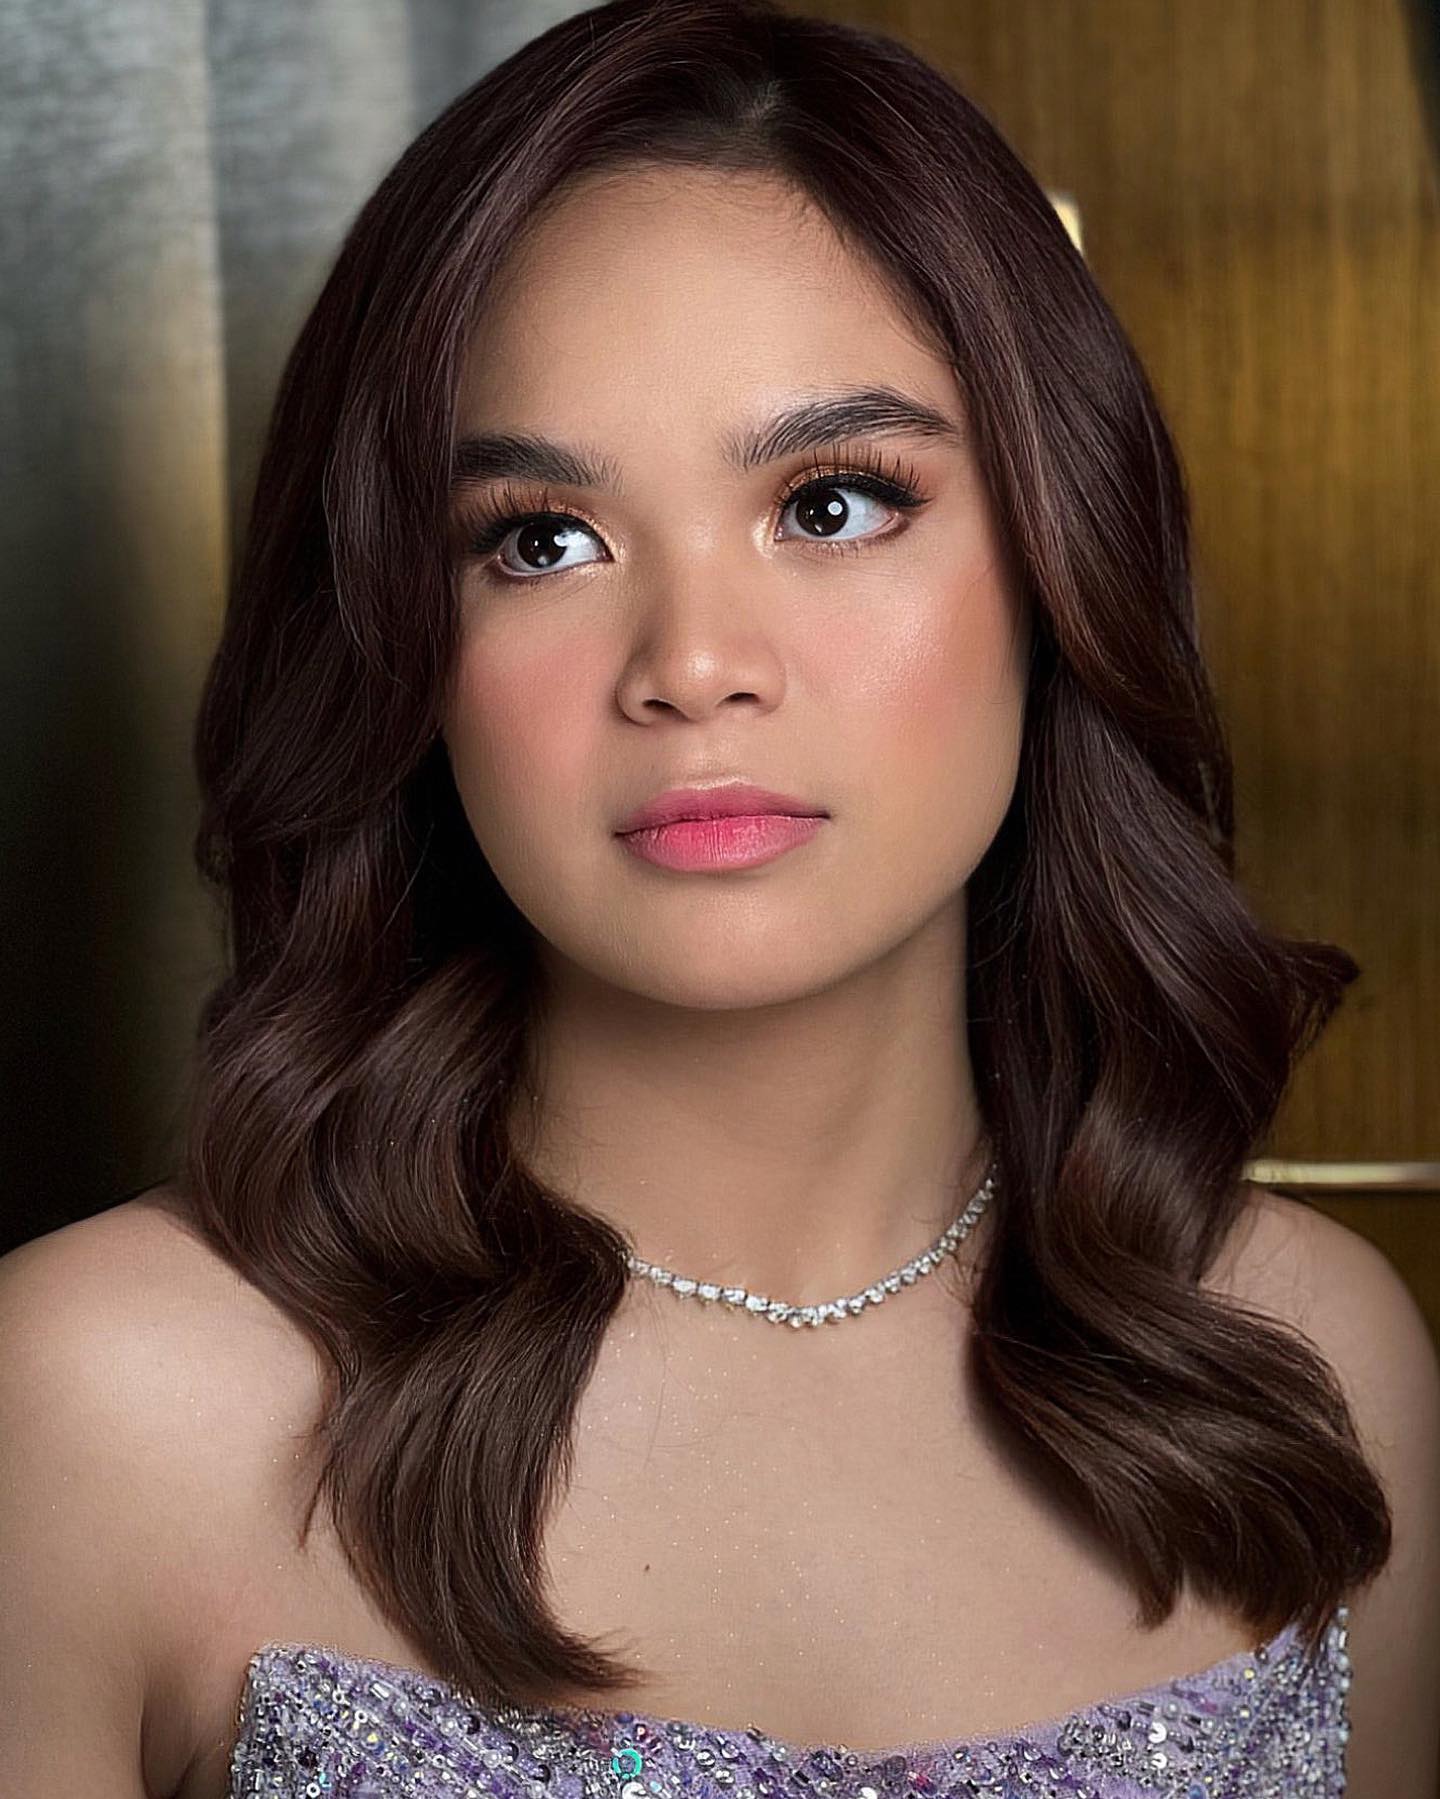 Manny Pacquiao's eldest daughter Princess attends prom in Swarovski-covered  gown